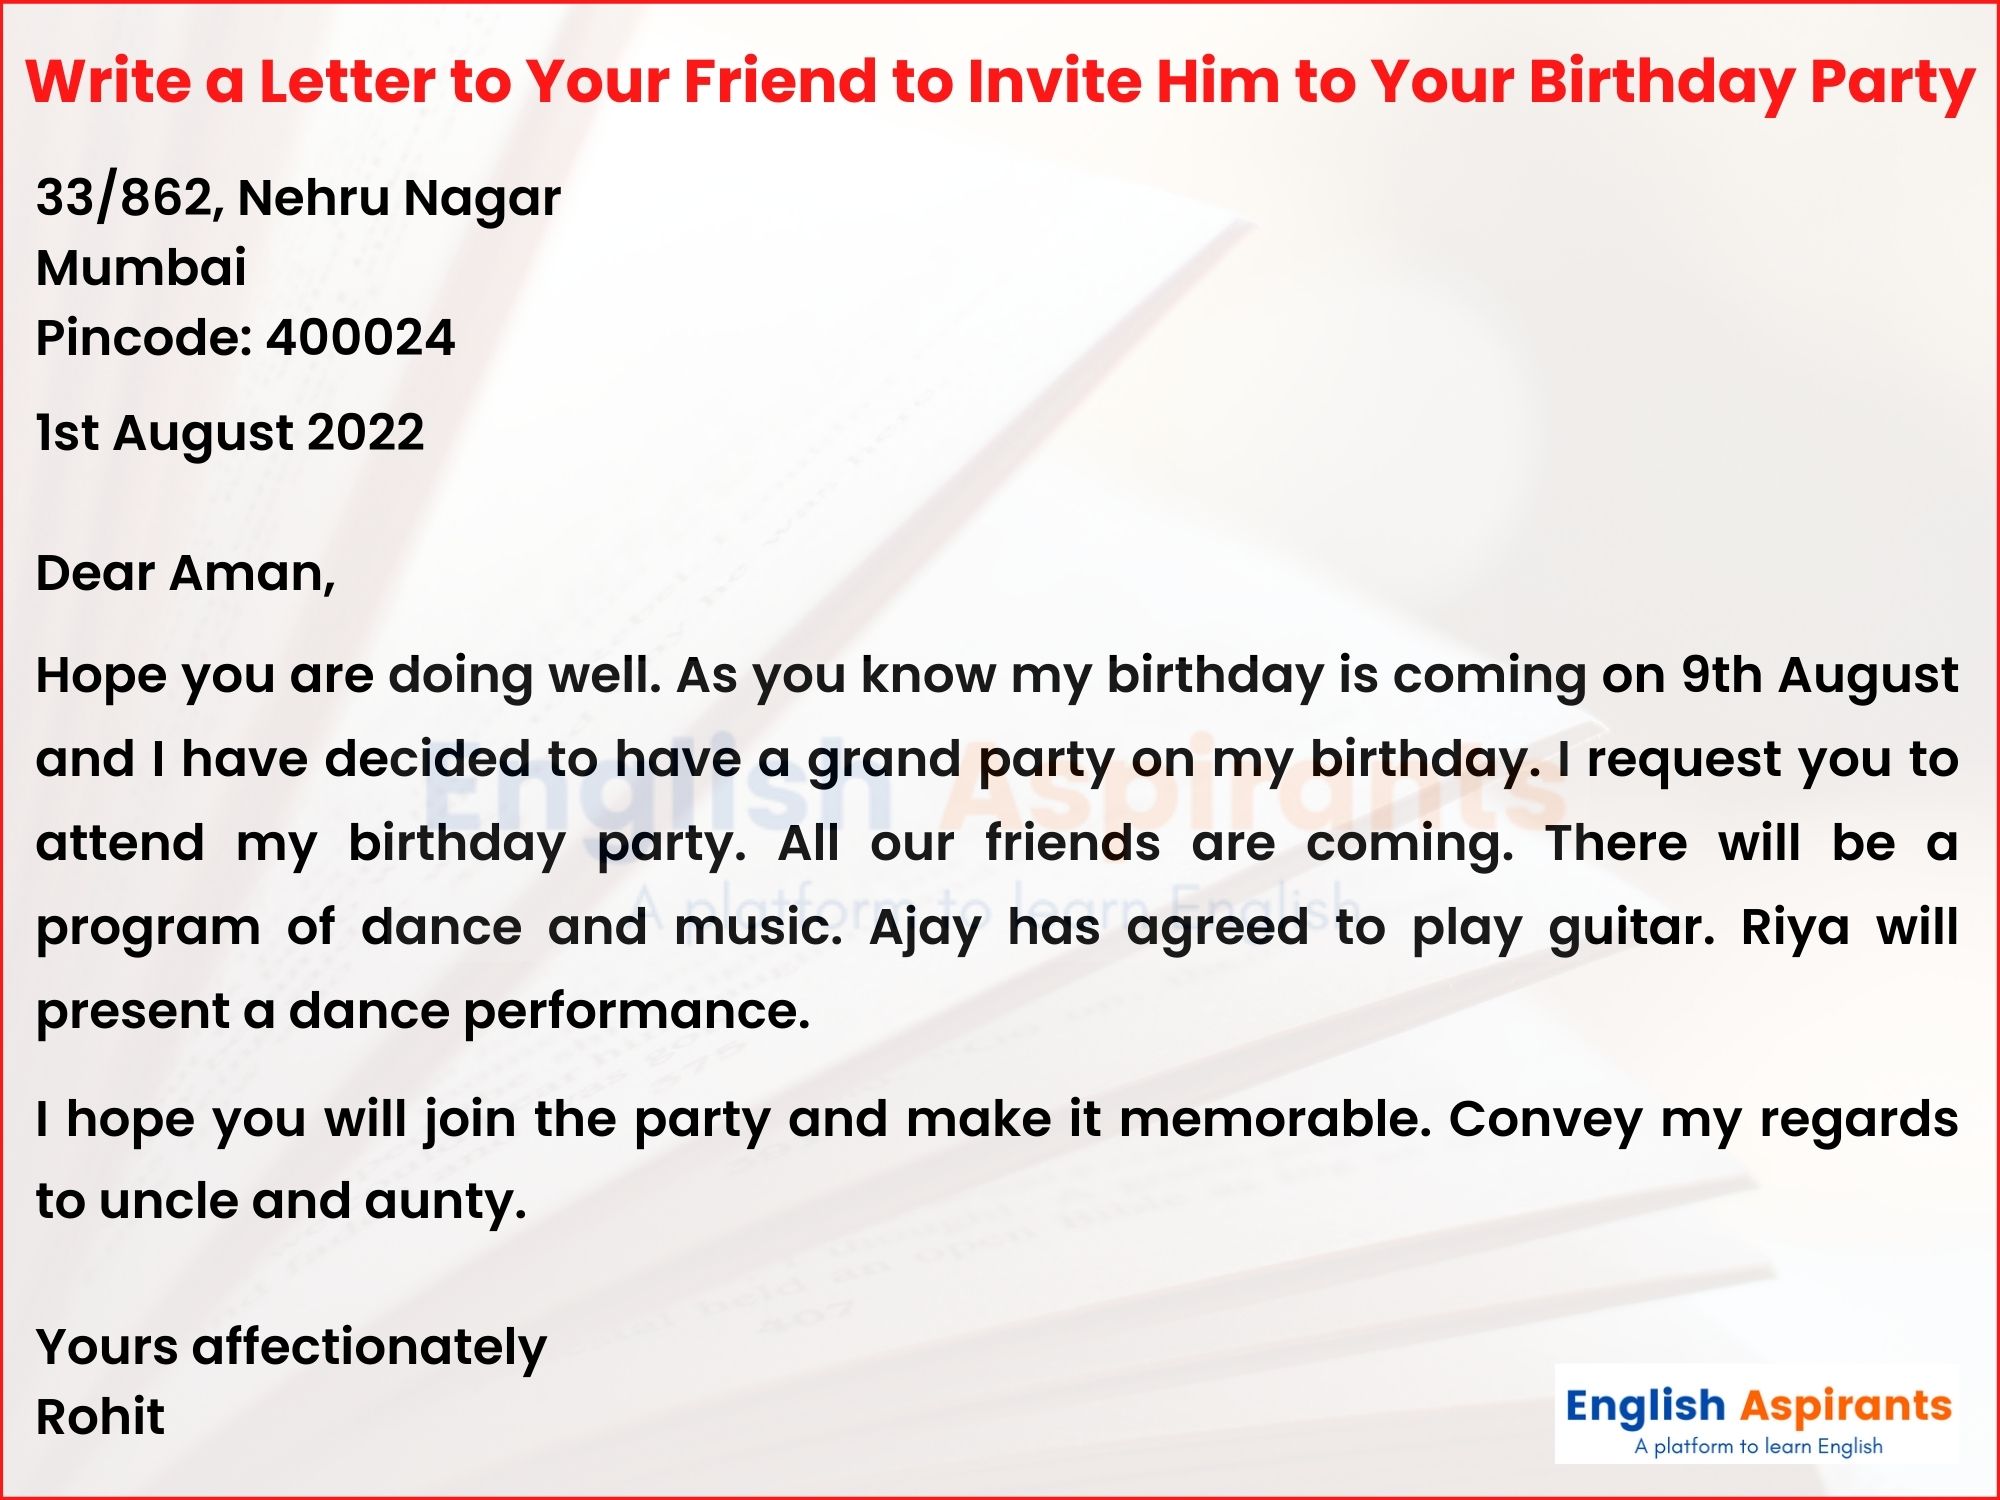 Write a Letter to Your Friend to invite him to Your Birthday Party